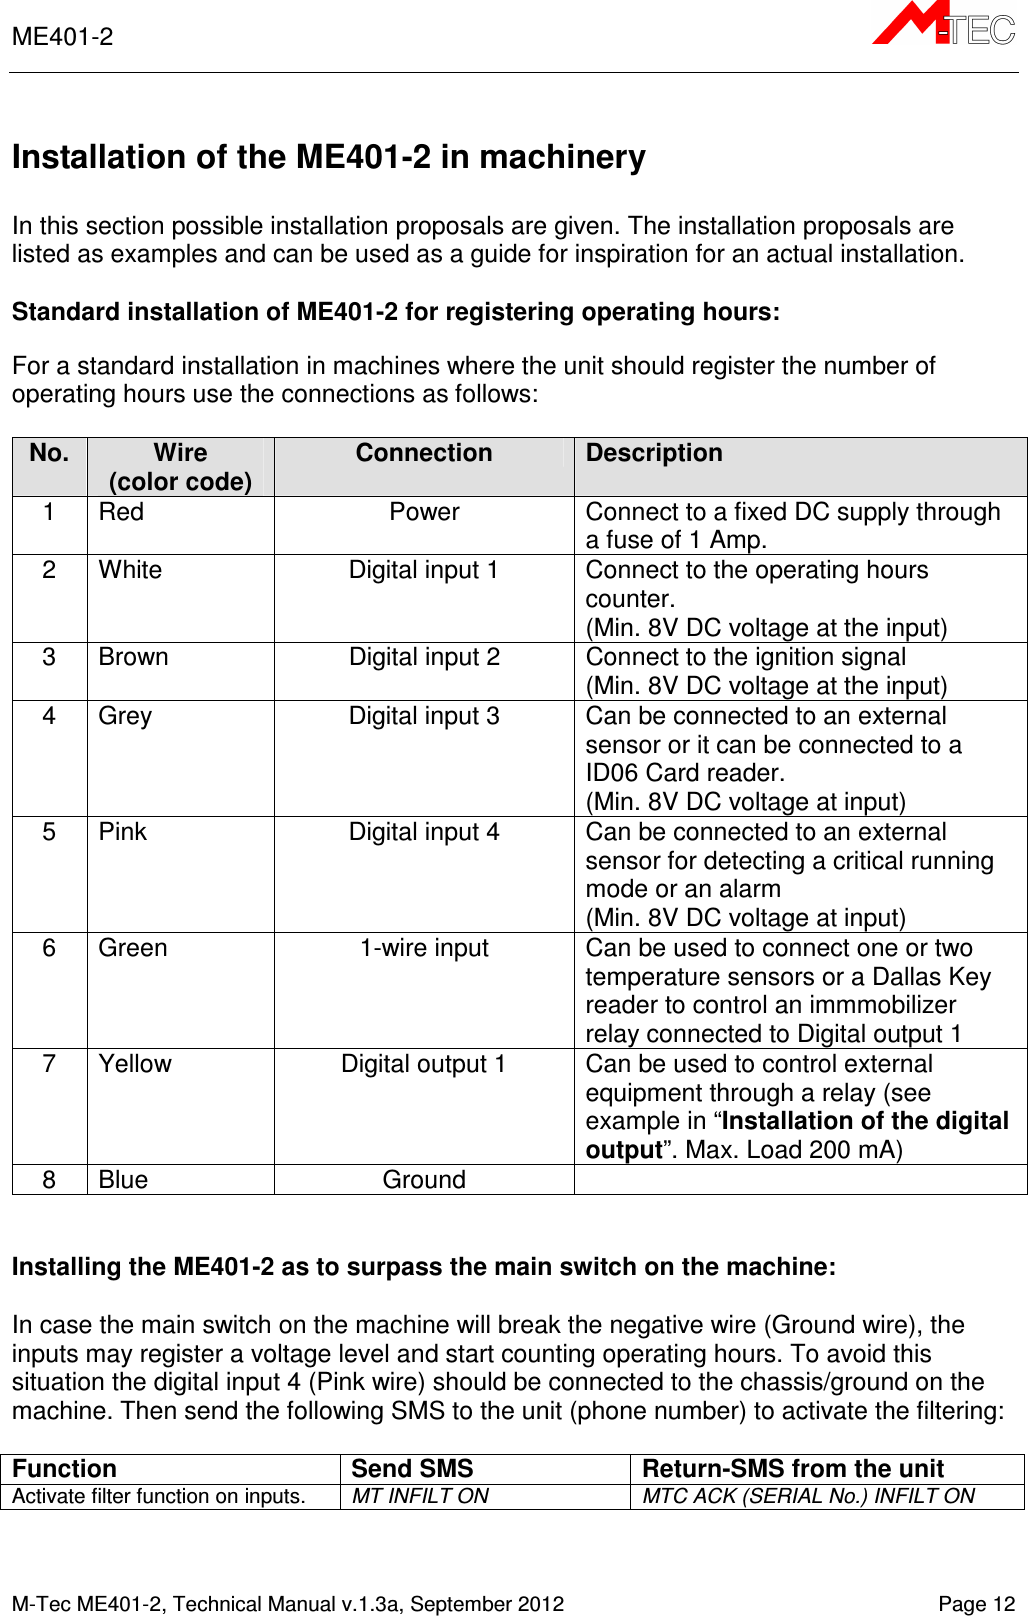 ME401-2       M-Tec ME401-2, Technical Manual v.1.3a, September 2012   Page 12  Installation of the ME401-2 in machinery  In this section possible installation proposals are given. The installation proposals are listed as examples and can be used as a guide for inspiration for an actual installation.   Standard installation of ME401-2 for registering operating hours: For a standard installation in machines where the unit should register the number of operating hours use the connections as follows:  No. Wire (color code) Connection Description 1  Red  Power  Connect to a fixed DC supply through a fuse of 1 Amp. 2  White  Digital input 1  Connect to the operating hours counter. (Min. 8V DC voltage at the input) 3  Brown  Digital input 2  Connect to the ignition signal (Min. 8V DC voltage at the input) 4  Grey  Digital input 3  Can be connected to an external sensor or it can be connected to a ID06 Card reader. (Min. 8V DC voltage at input) 5  Pink  Digital input 4  Can be connected to an external sensor for detecting a critical running mode or an alarm (Min. 8V DC voltage at input) 6  Green  1-wire input  Can be used to connect one or two temperature sensors or a Dallas Key reader to control an immmobilizer relay connected to Digital output 1  7  Yellow  Digital output 1  Can be used to control external equipment through a relay (see example in “Installation of the digital output”. Max. Load 200 mA) 8  Blue  Ground     Installing the ME401-2 as to surpass the main switch on the machine:  In case the main switch on the machine will break the negative wire (Ground wire), the inputs may register a voltage level and start counting operating hours. To avoid this situation the digital input 4 (Pink wire) should be connected to the chassis/ground on the machine. Then send the following SMS to the unit (phone number) to activate the filtering:   Function Send SMS Return-SMS from the unit Activate filter function on inputs.  MT INFILT ON MTC ACK (SERIAL No.) INFILT ON  